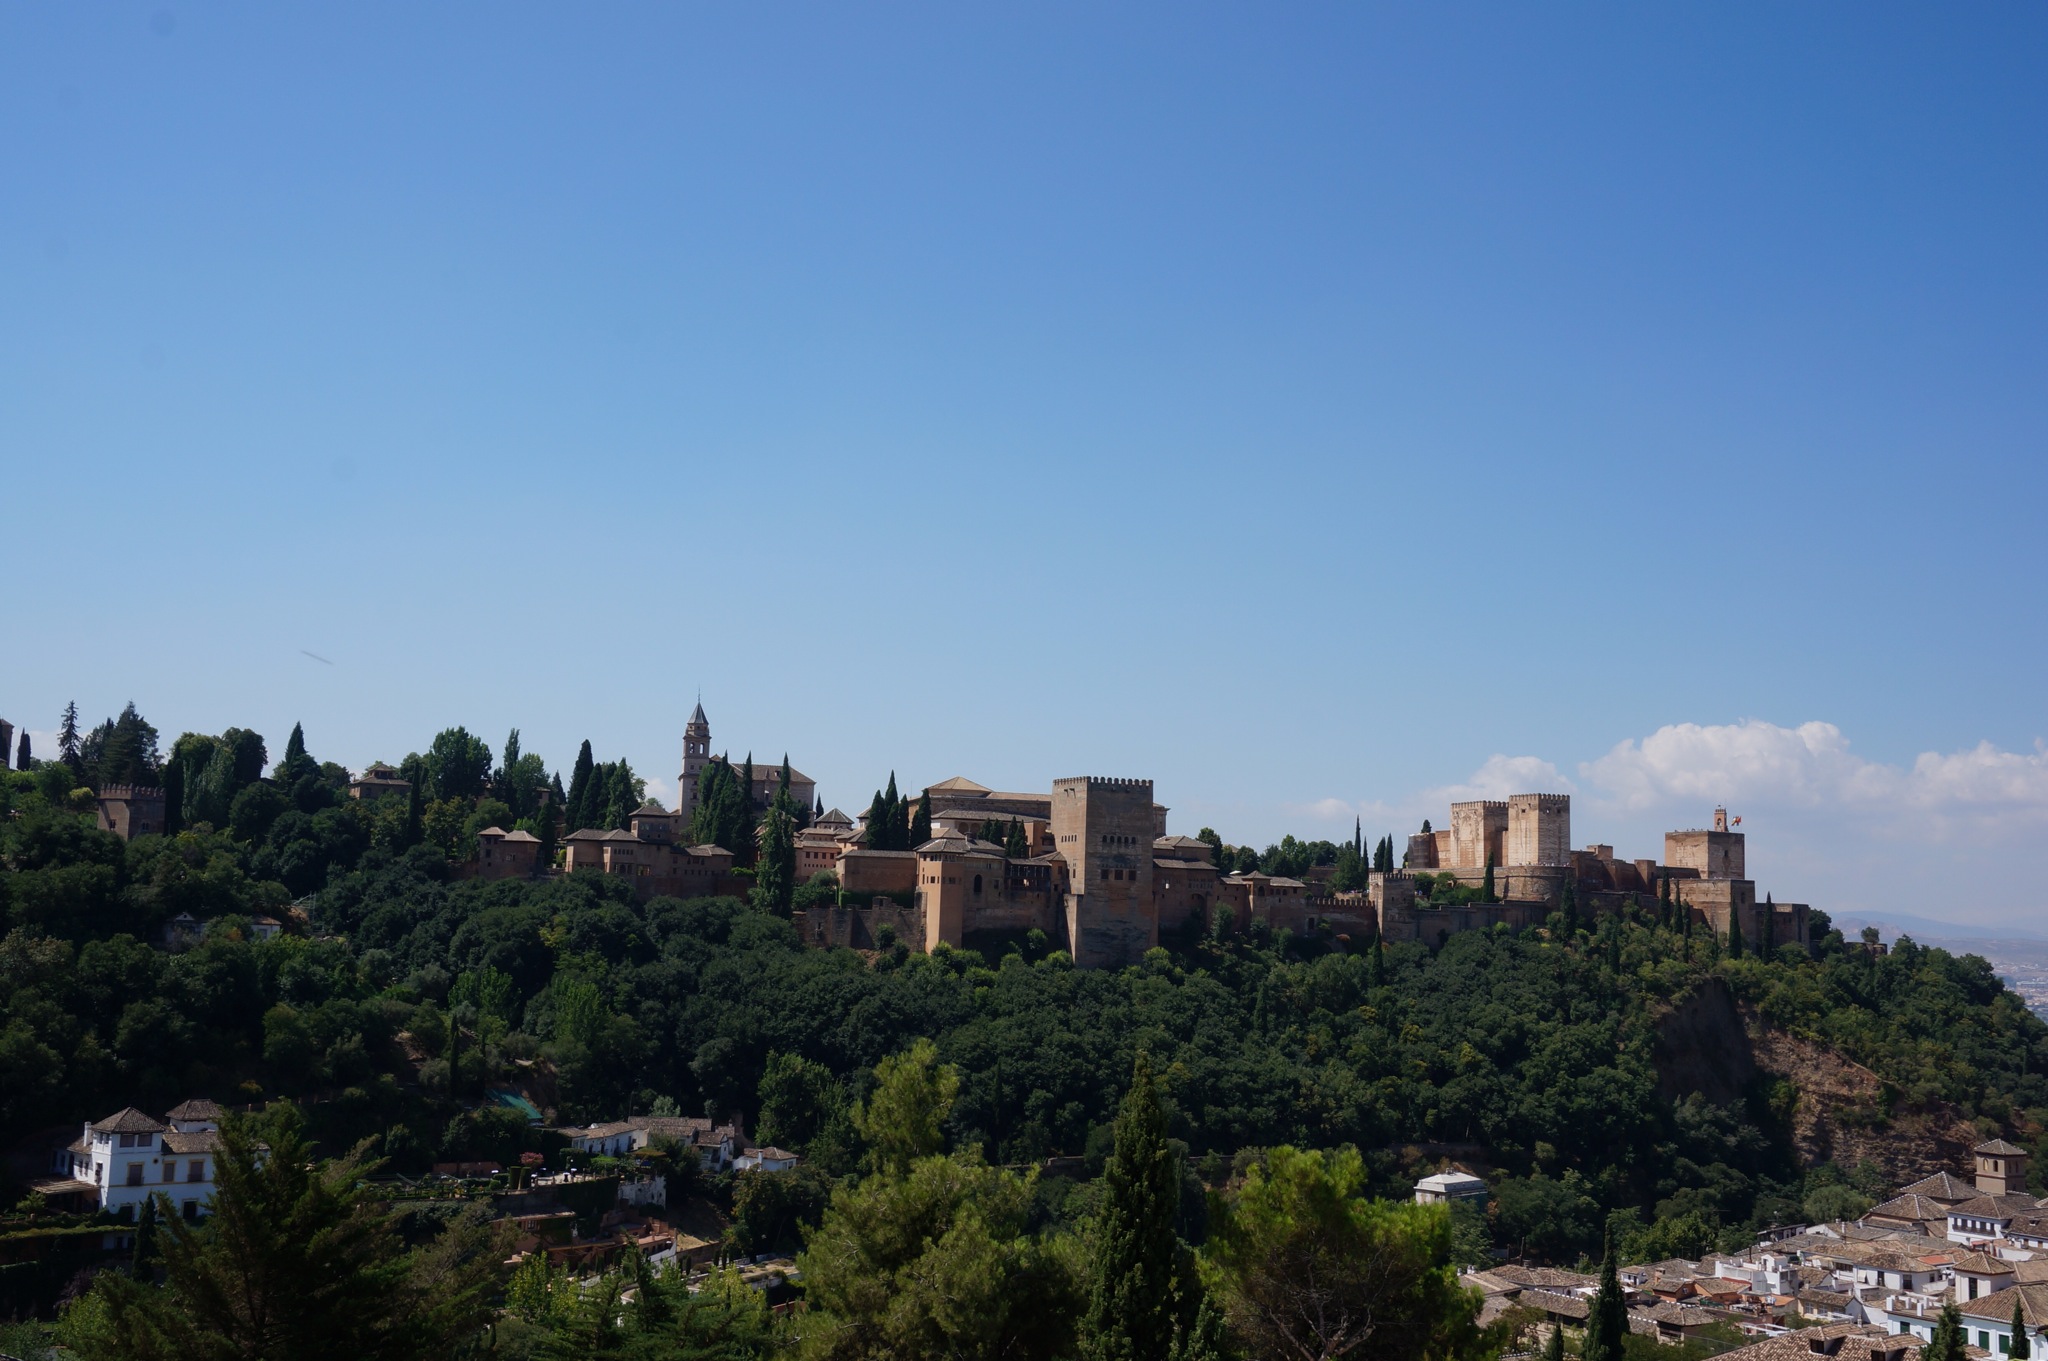 A trip to Granada is not complete without touring La Alhambra. Our guide said, "You won't leave Granada without seeing La Alhambra."